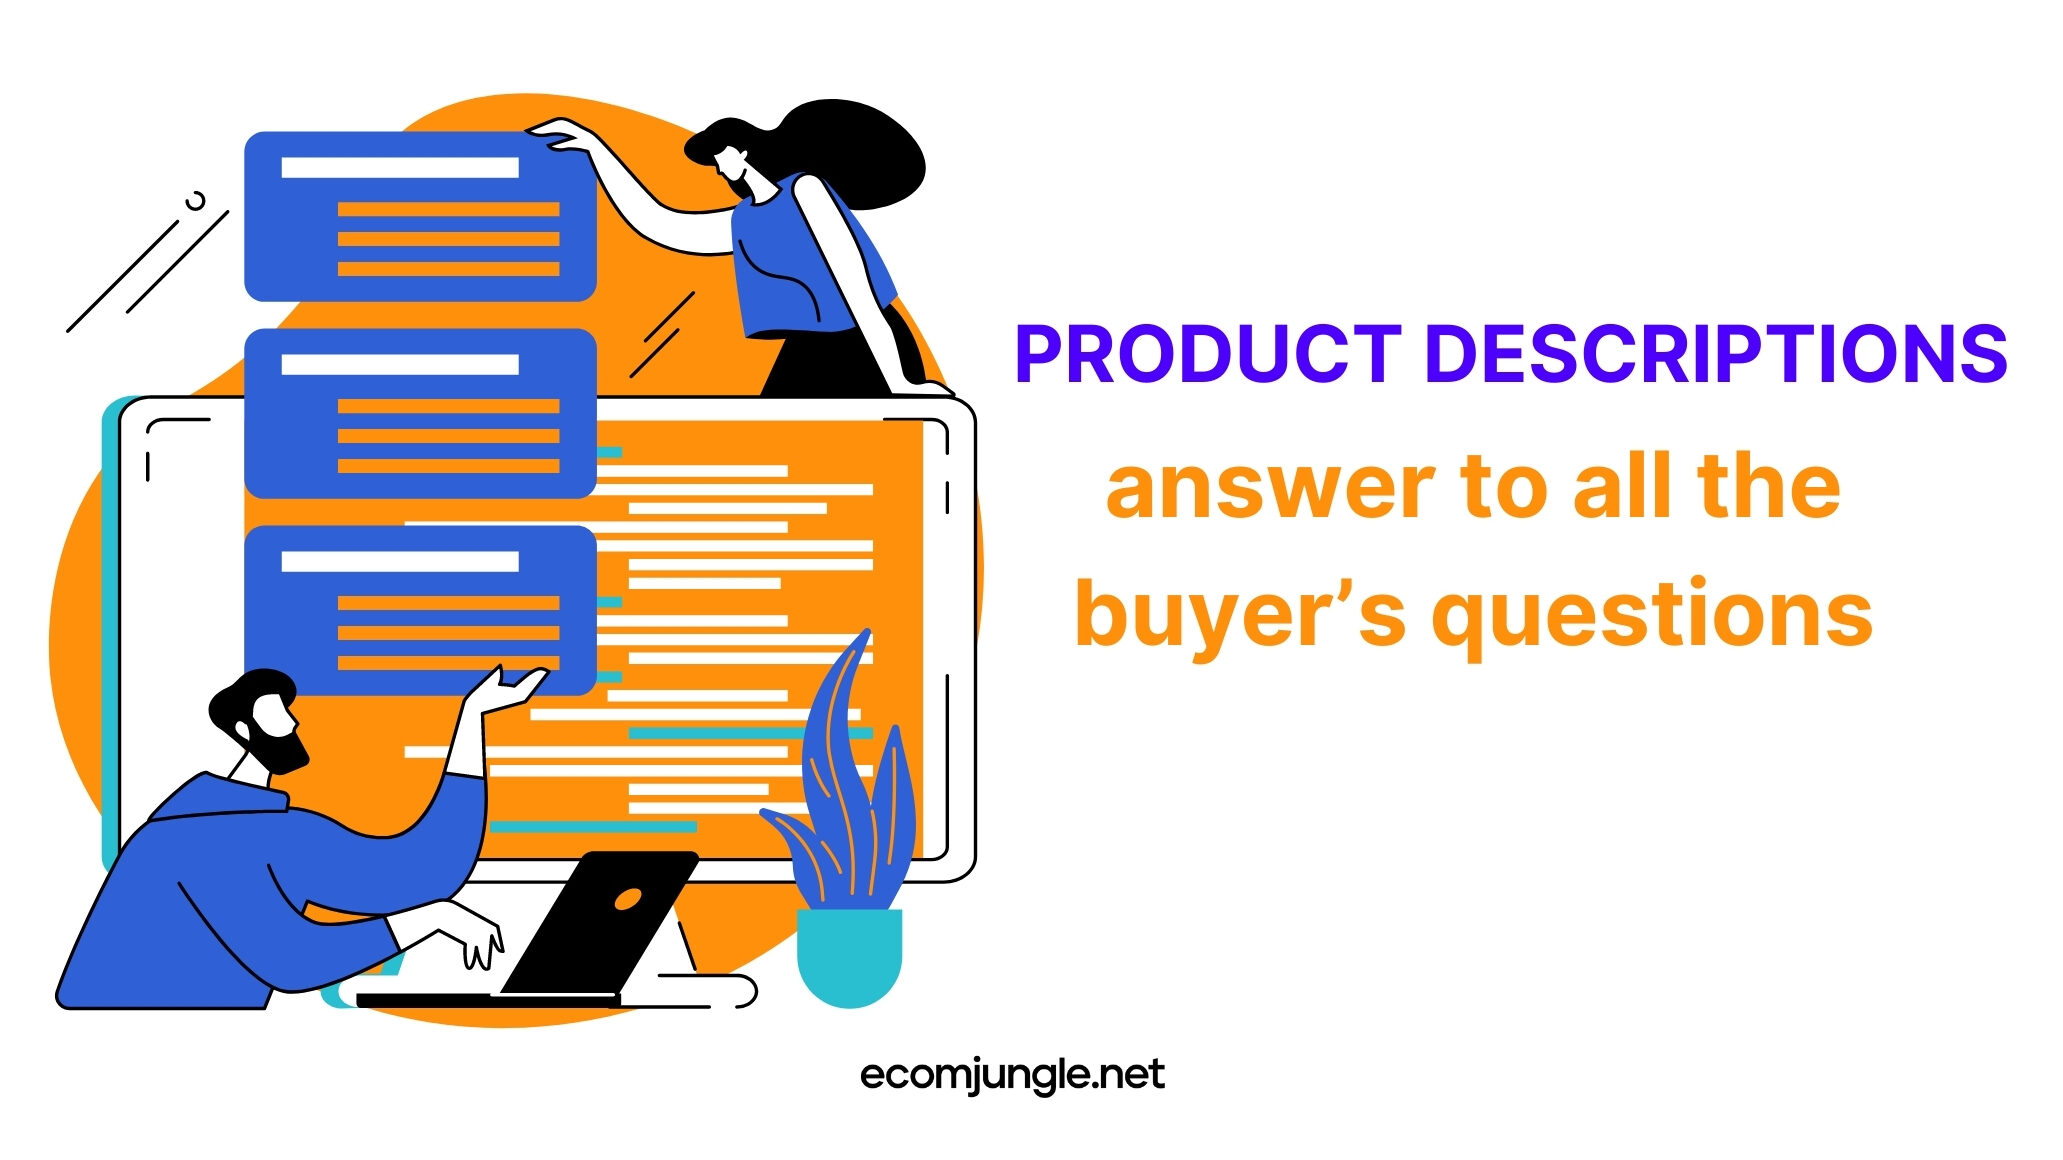 Product descriptions are important because they answer all the buyer's questions, inform them why it is the best option to choose.